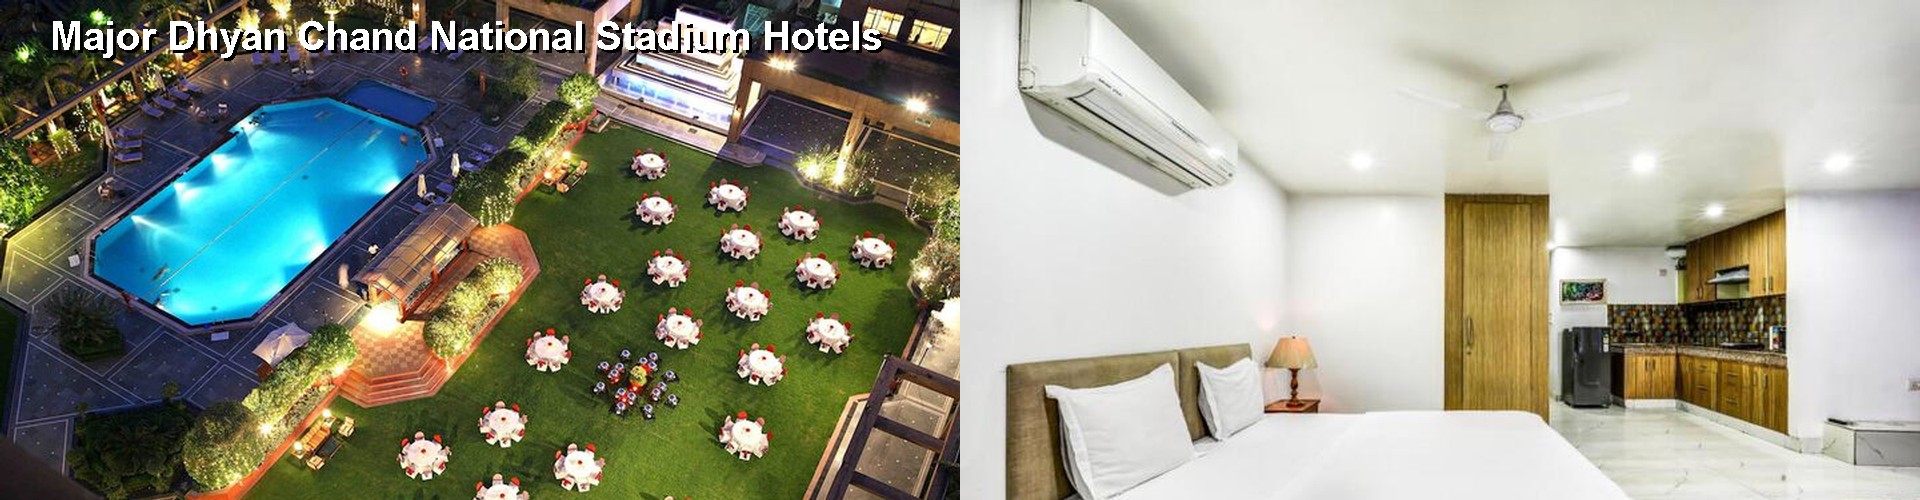 5 Best Hotels near Major Dhyan Chand National Stadium